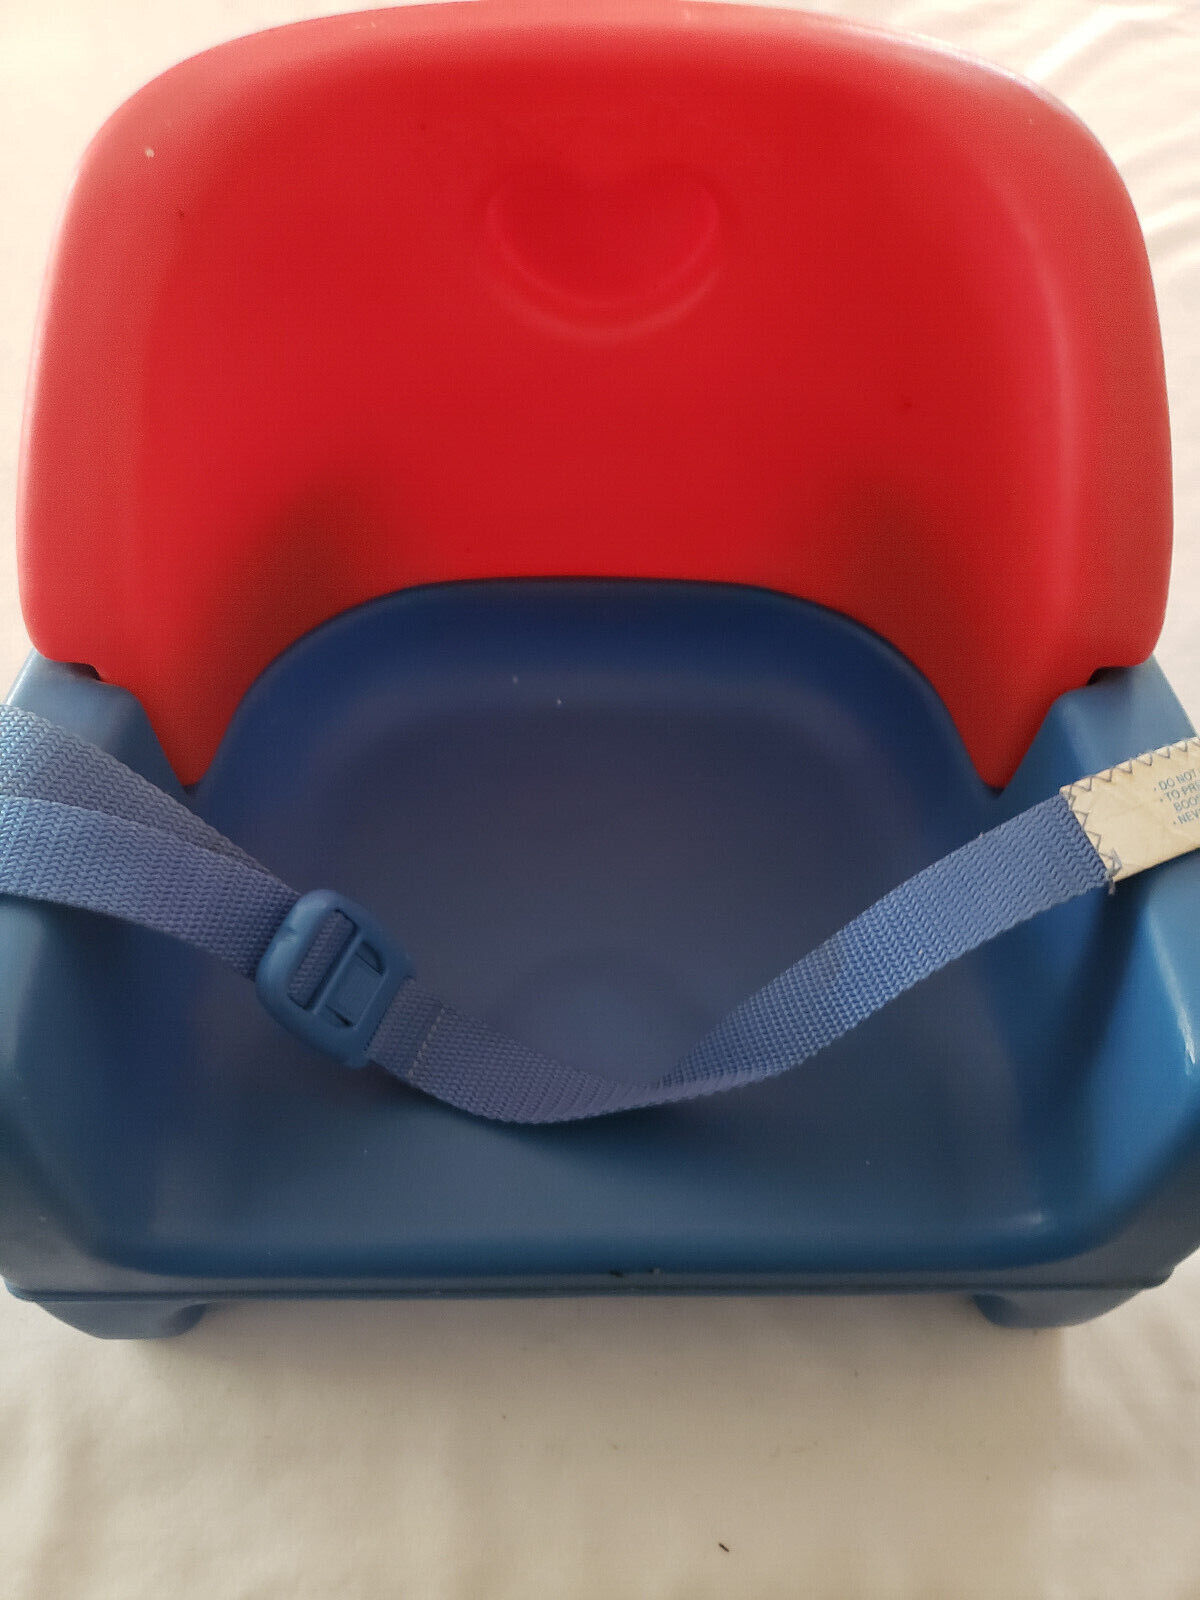 1990 Fisher Price Grow With Me Booster Seat Red / Blue Plastic Vintage Booster